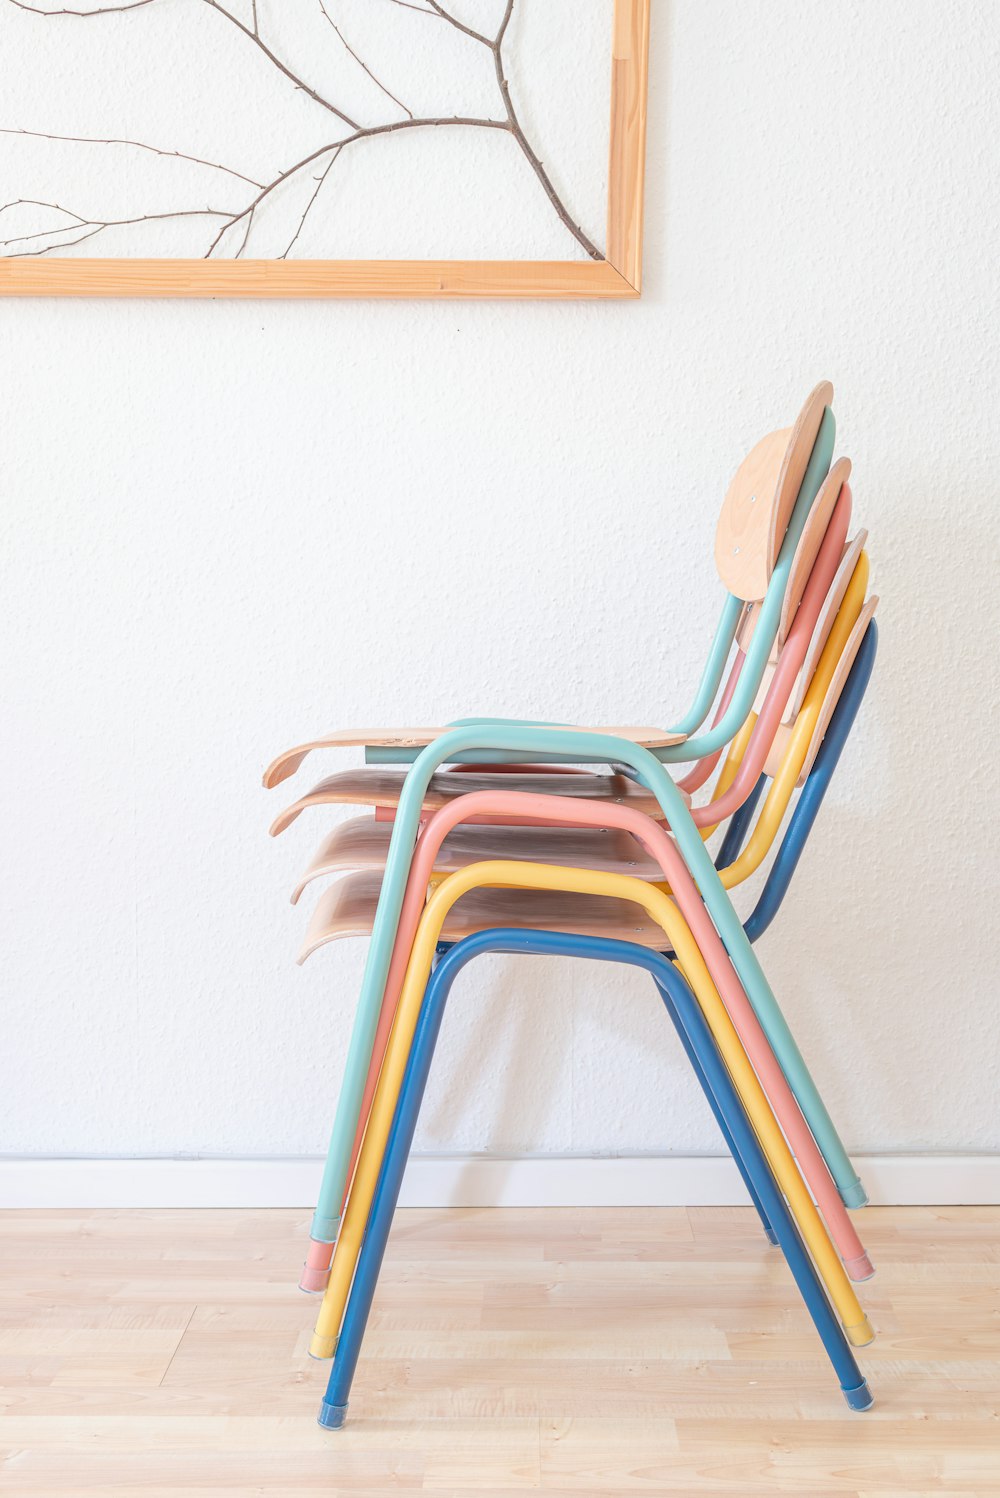 a stack of multicolored chairs against a white wall